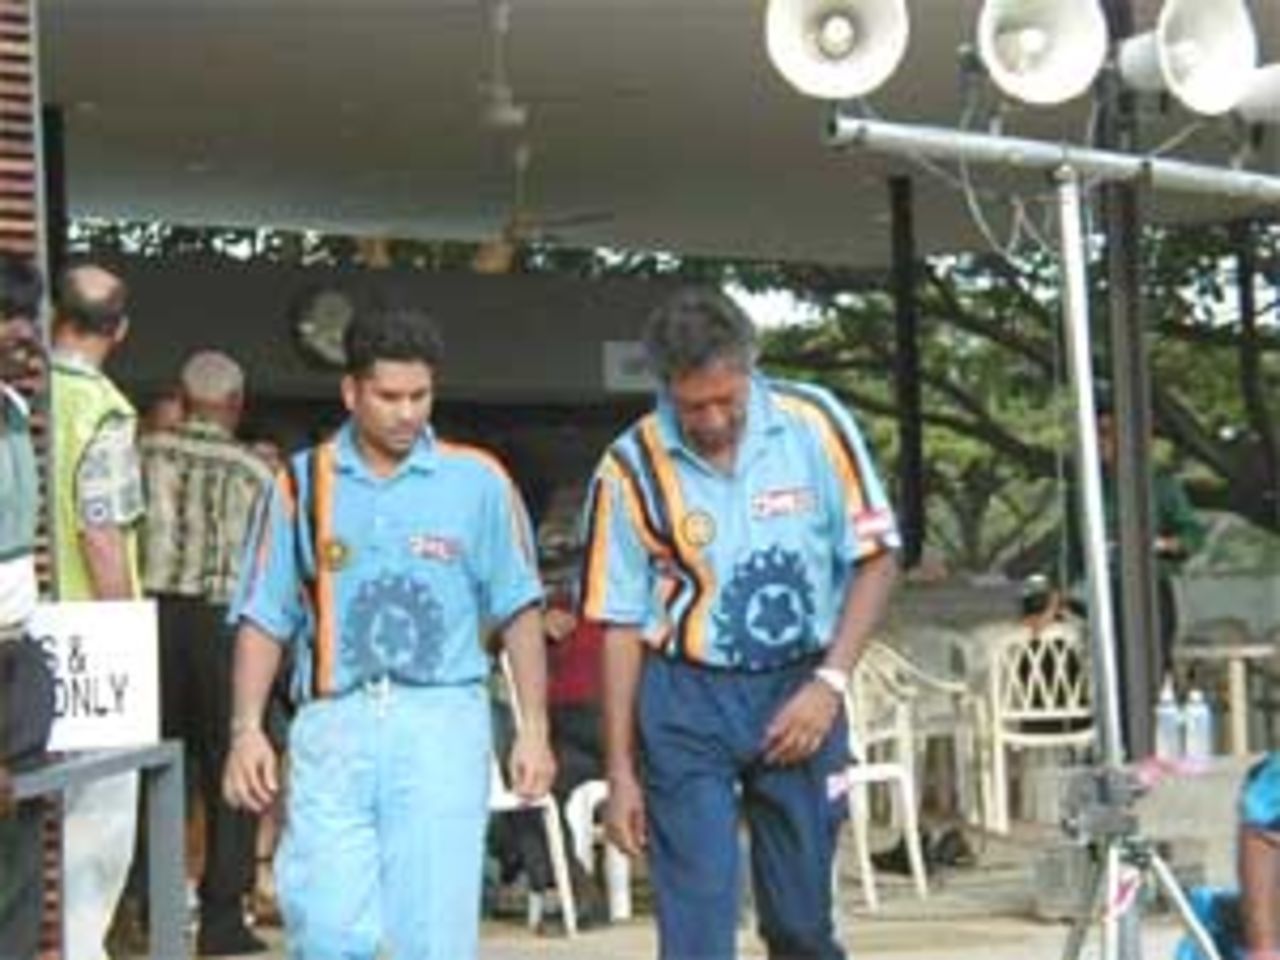 The Indian captain and coach look dejected after being beaten by West Indies, India v West Indies (Final), Coca-Cola Singapore Challenge, 1999-2000, Kallang Ground, Singapore, 8 Sep 1999